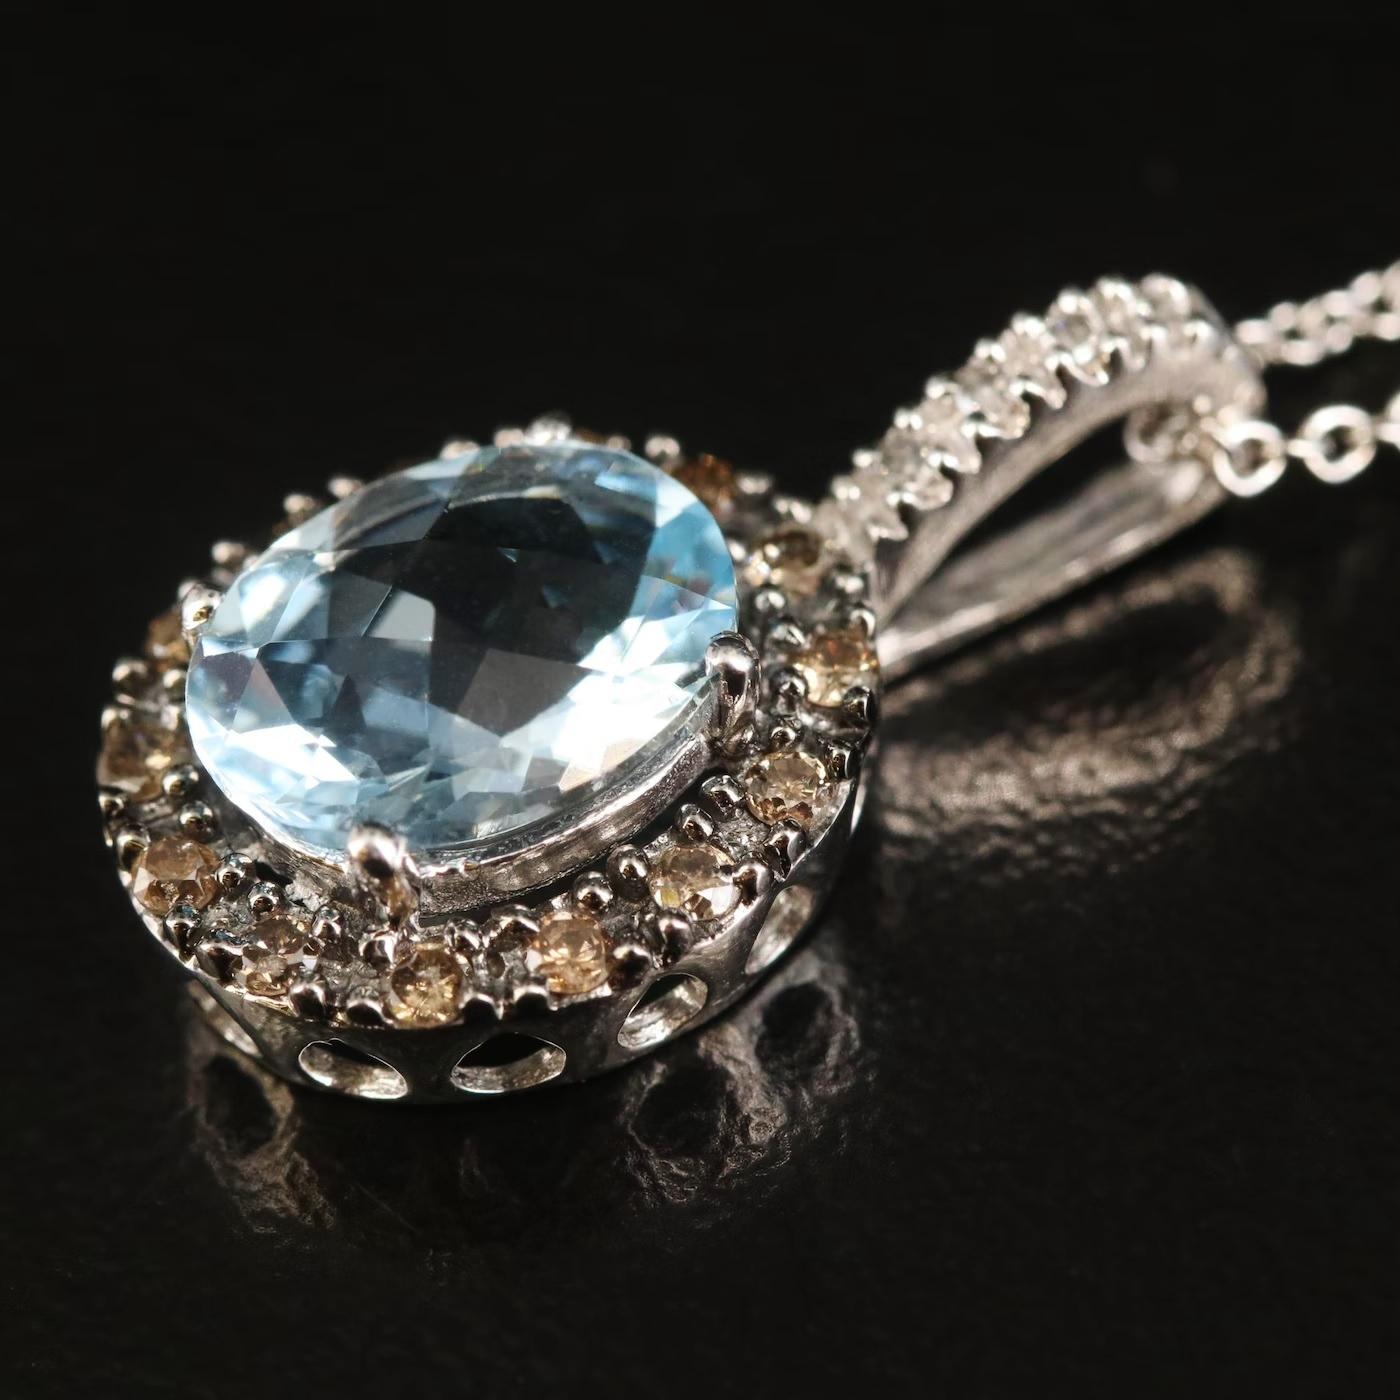 Effy Designer Necklace, stamped and hallmarked

NEW with Tags, Tag price $2950

2.52 CWT Natural Diamond & Natural Aquamarine, TOP QUALITY 

14K Gold, stamped 14K

Comes with gift box